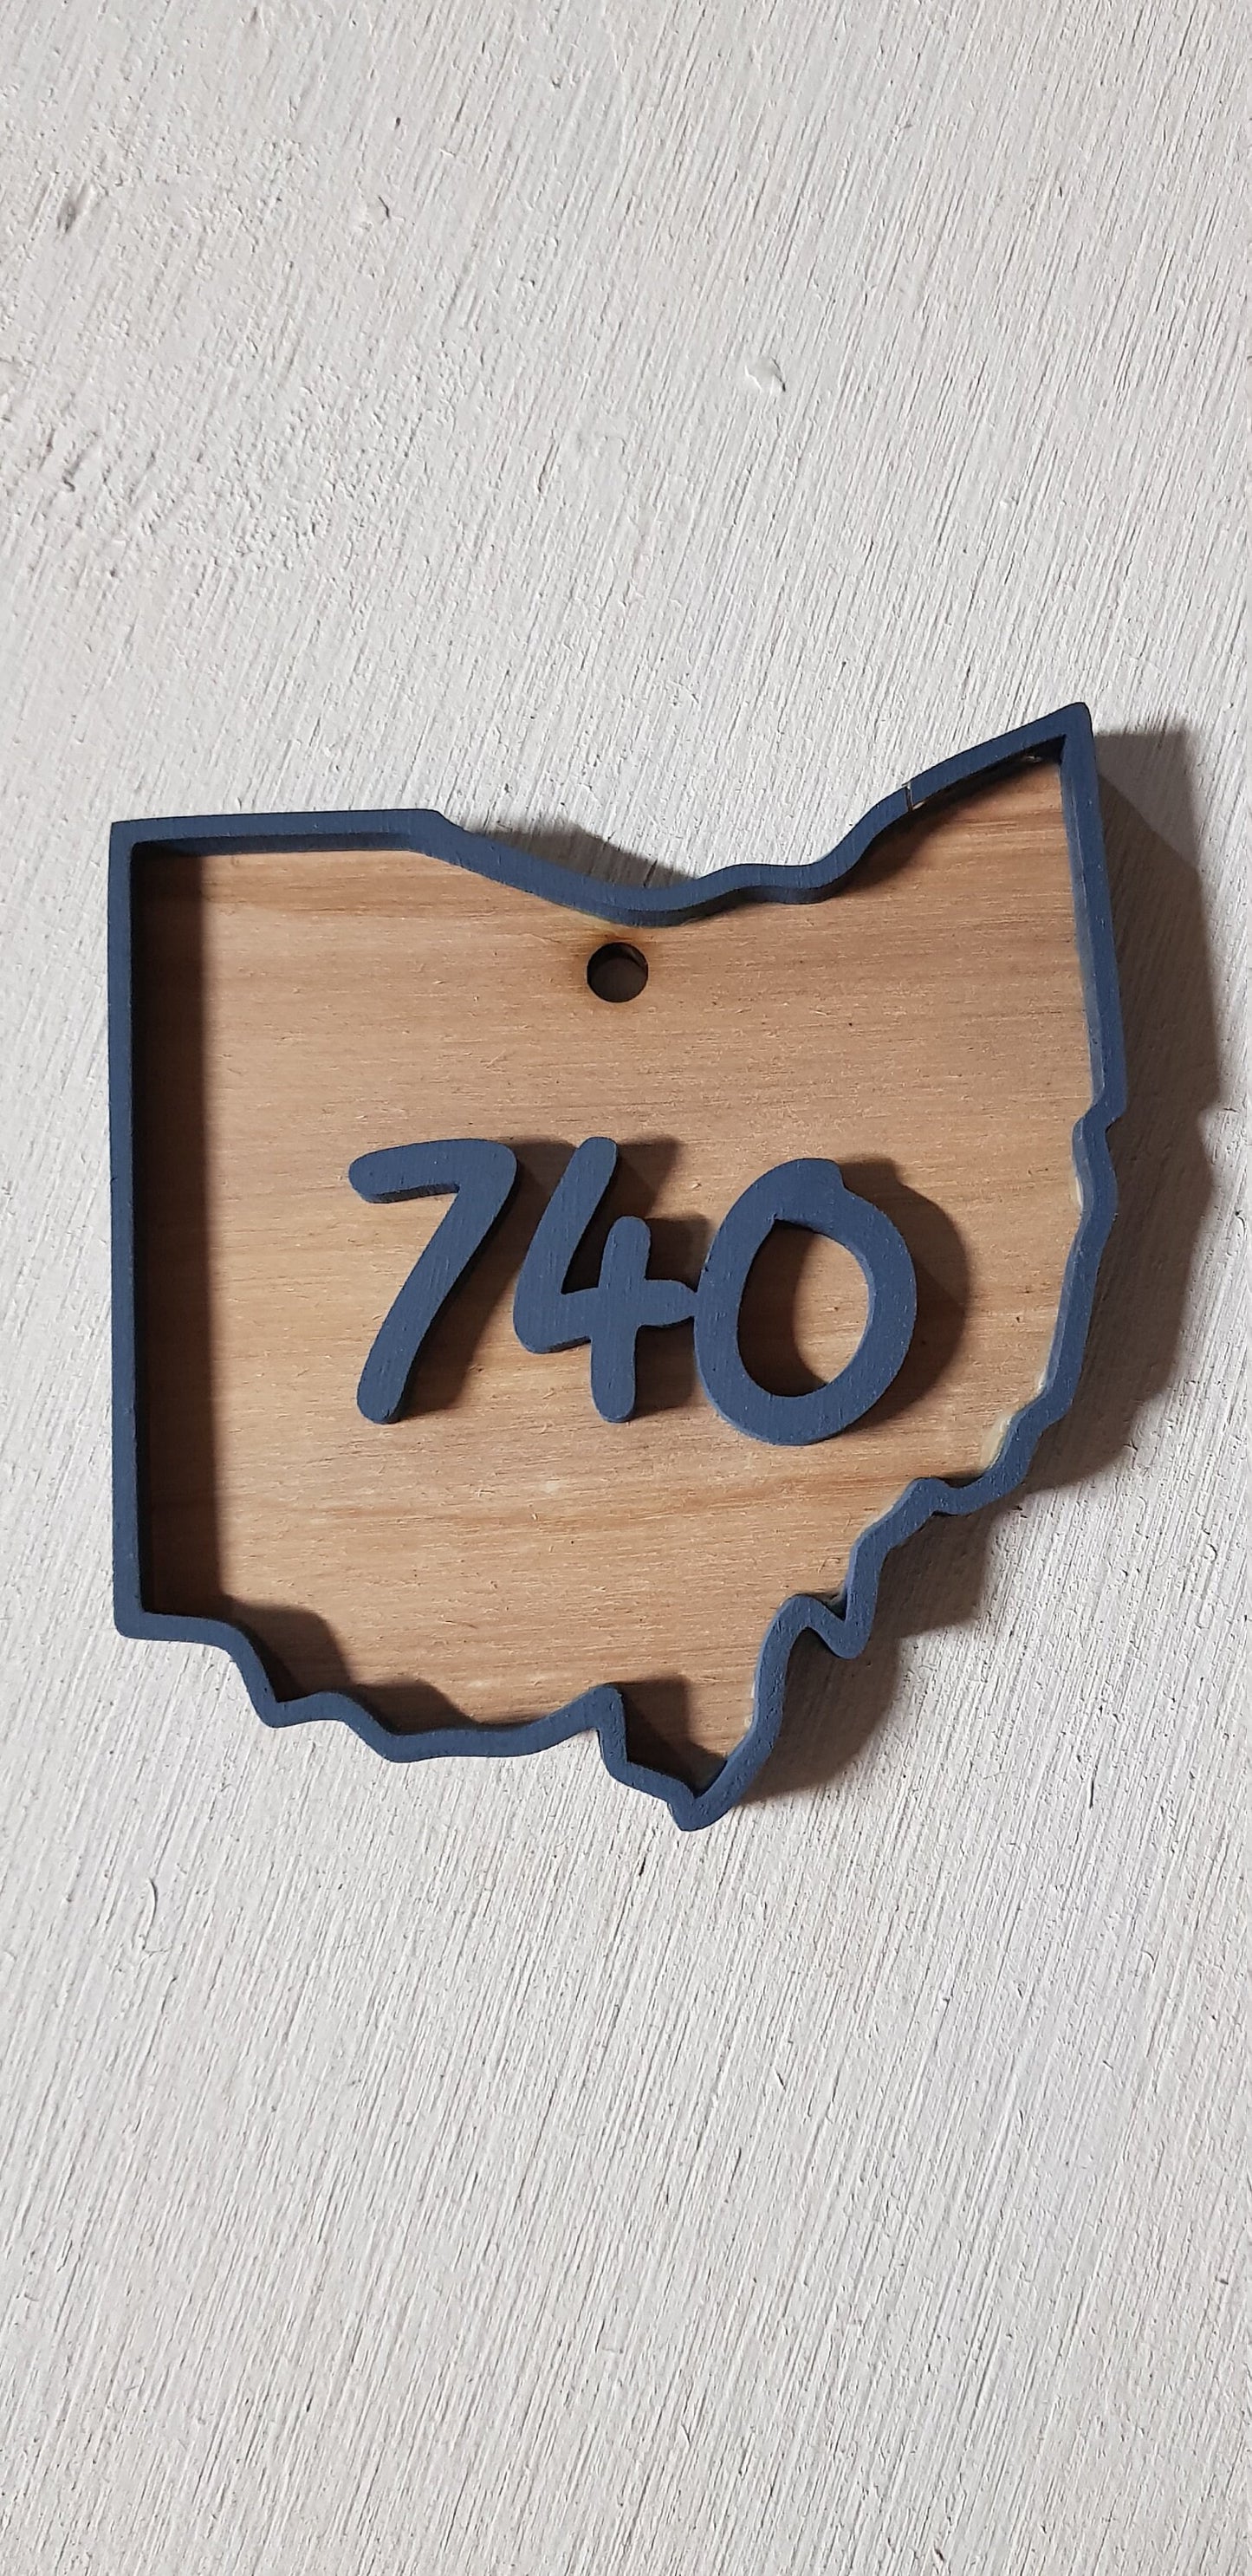 Custom State, Raised Area Code, Raised Sign, Ohio, 740, 3D, Wood, Your Words, Custom, Wooden Words, Laser Cut Out, Wood Cut Out